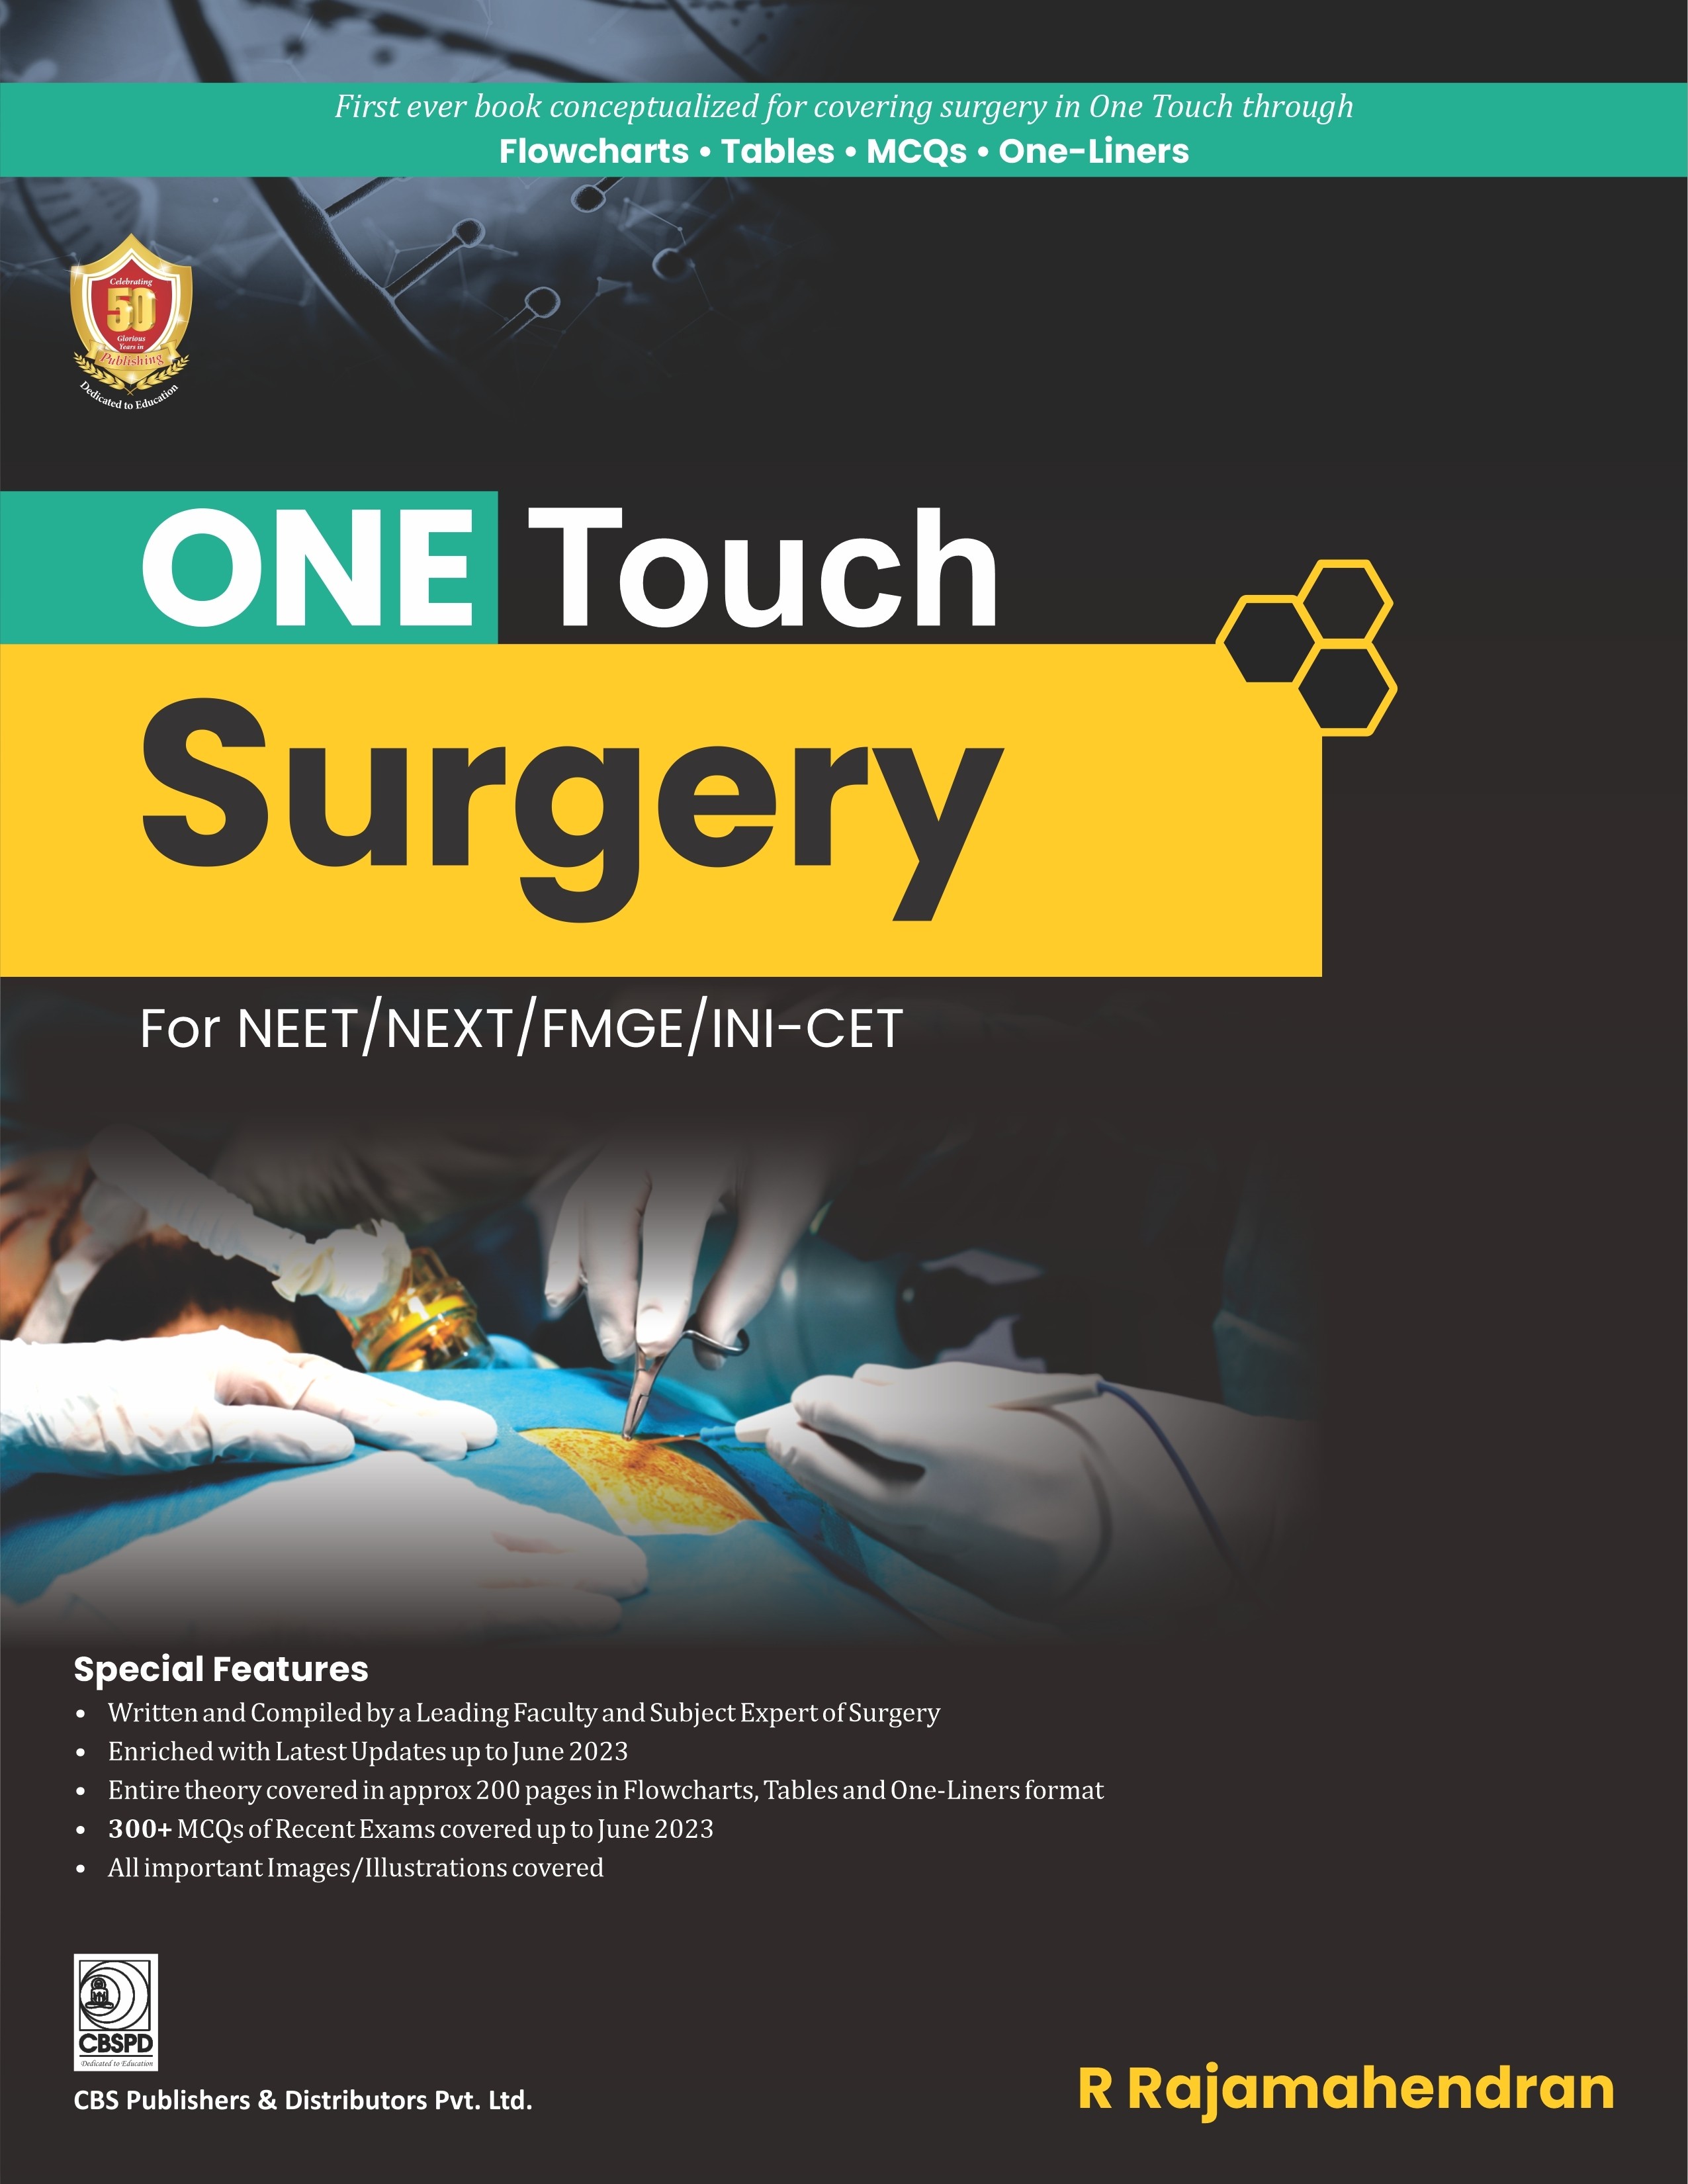 One Touch Surgery For NEET/NEXT/FMGE/INI-CET